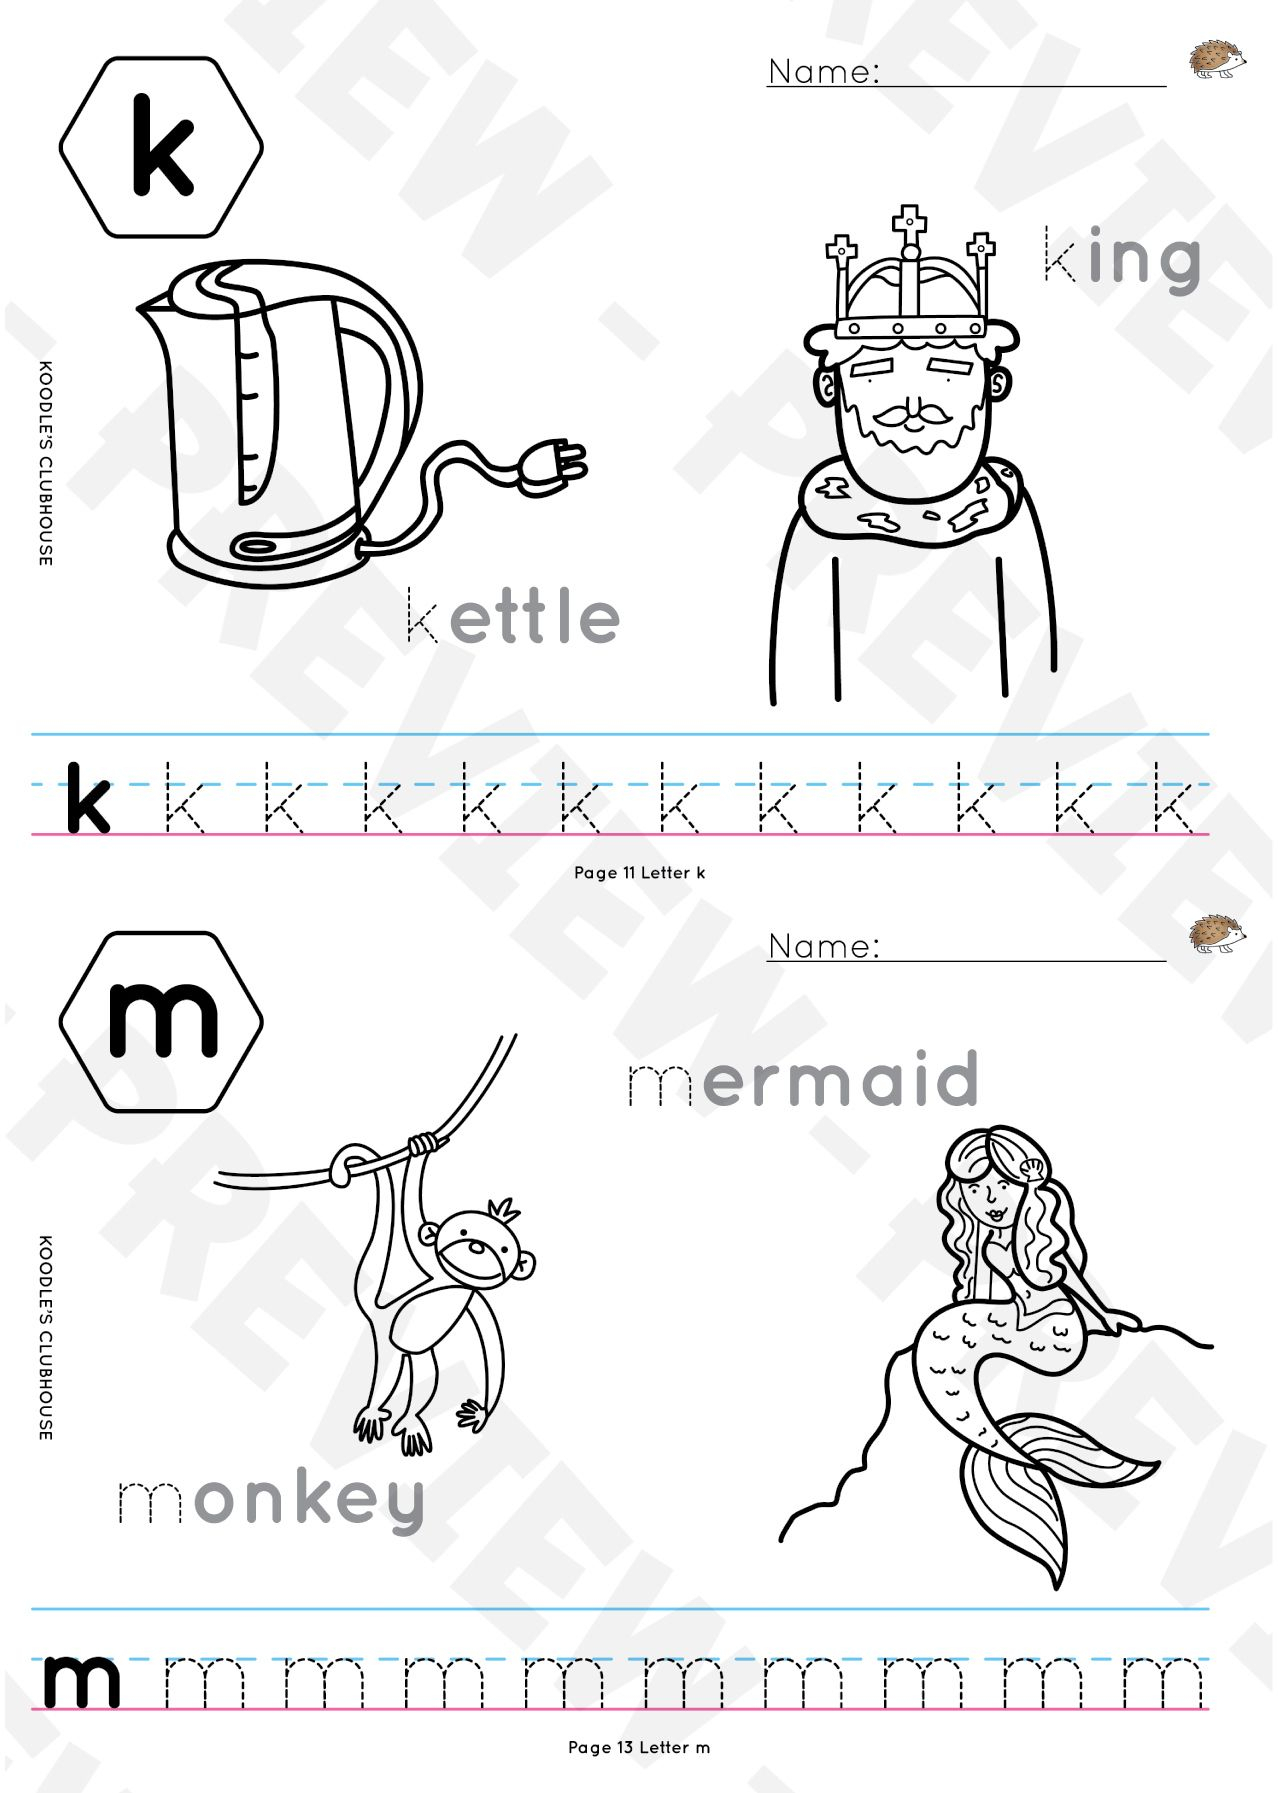 A To Z Tracing Worksheets | Tracing Worksheets, Letter in A-Z Name Tracing